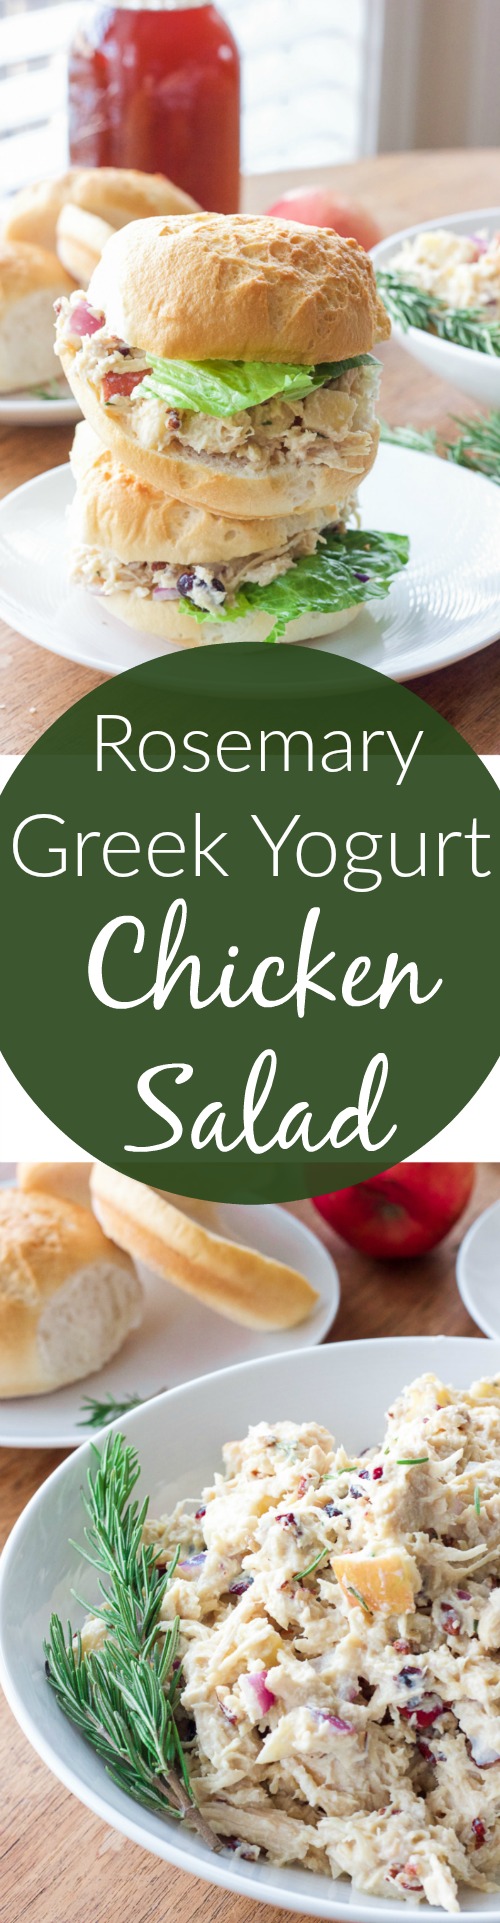 OMG yum! This rosemary greek yogurt chicken salad is a light and fresh (and gluten-free!) approach to chicken salad! The list of healthy ingredients come together to make one sweet and savory masterpiece of a salad or gluten free sandwich!